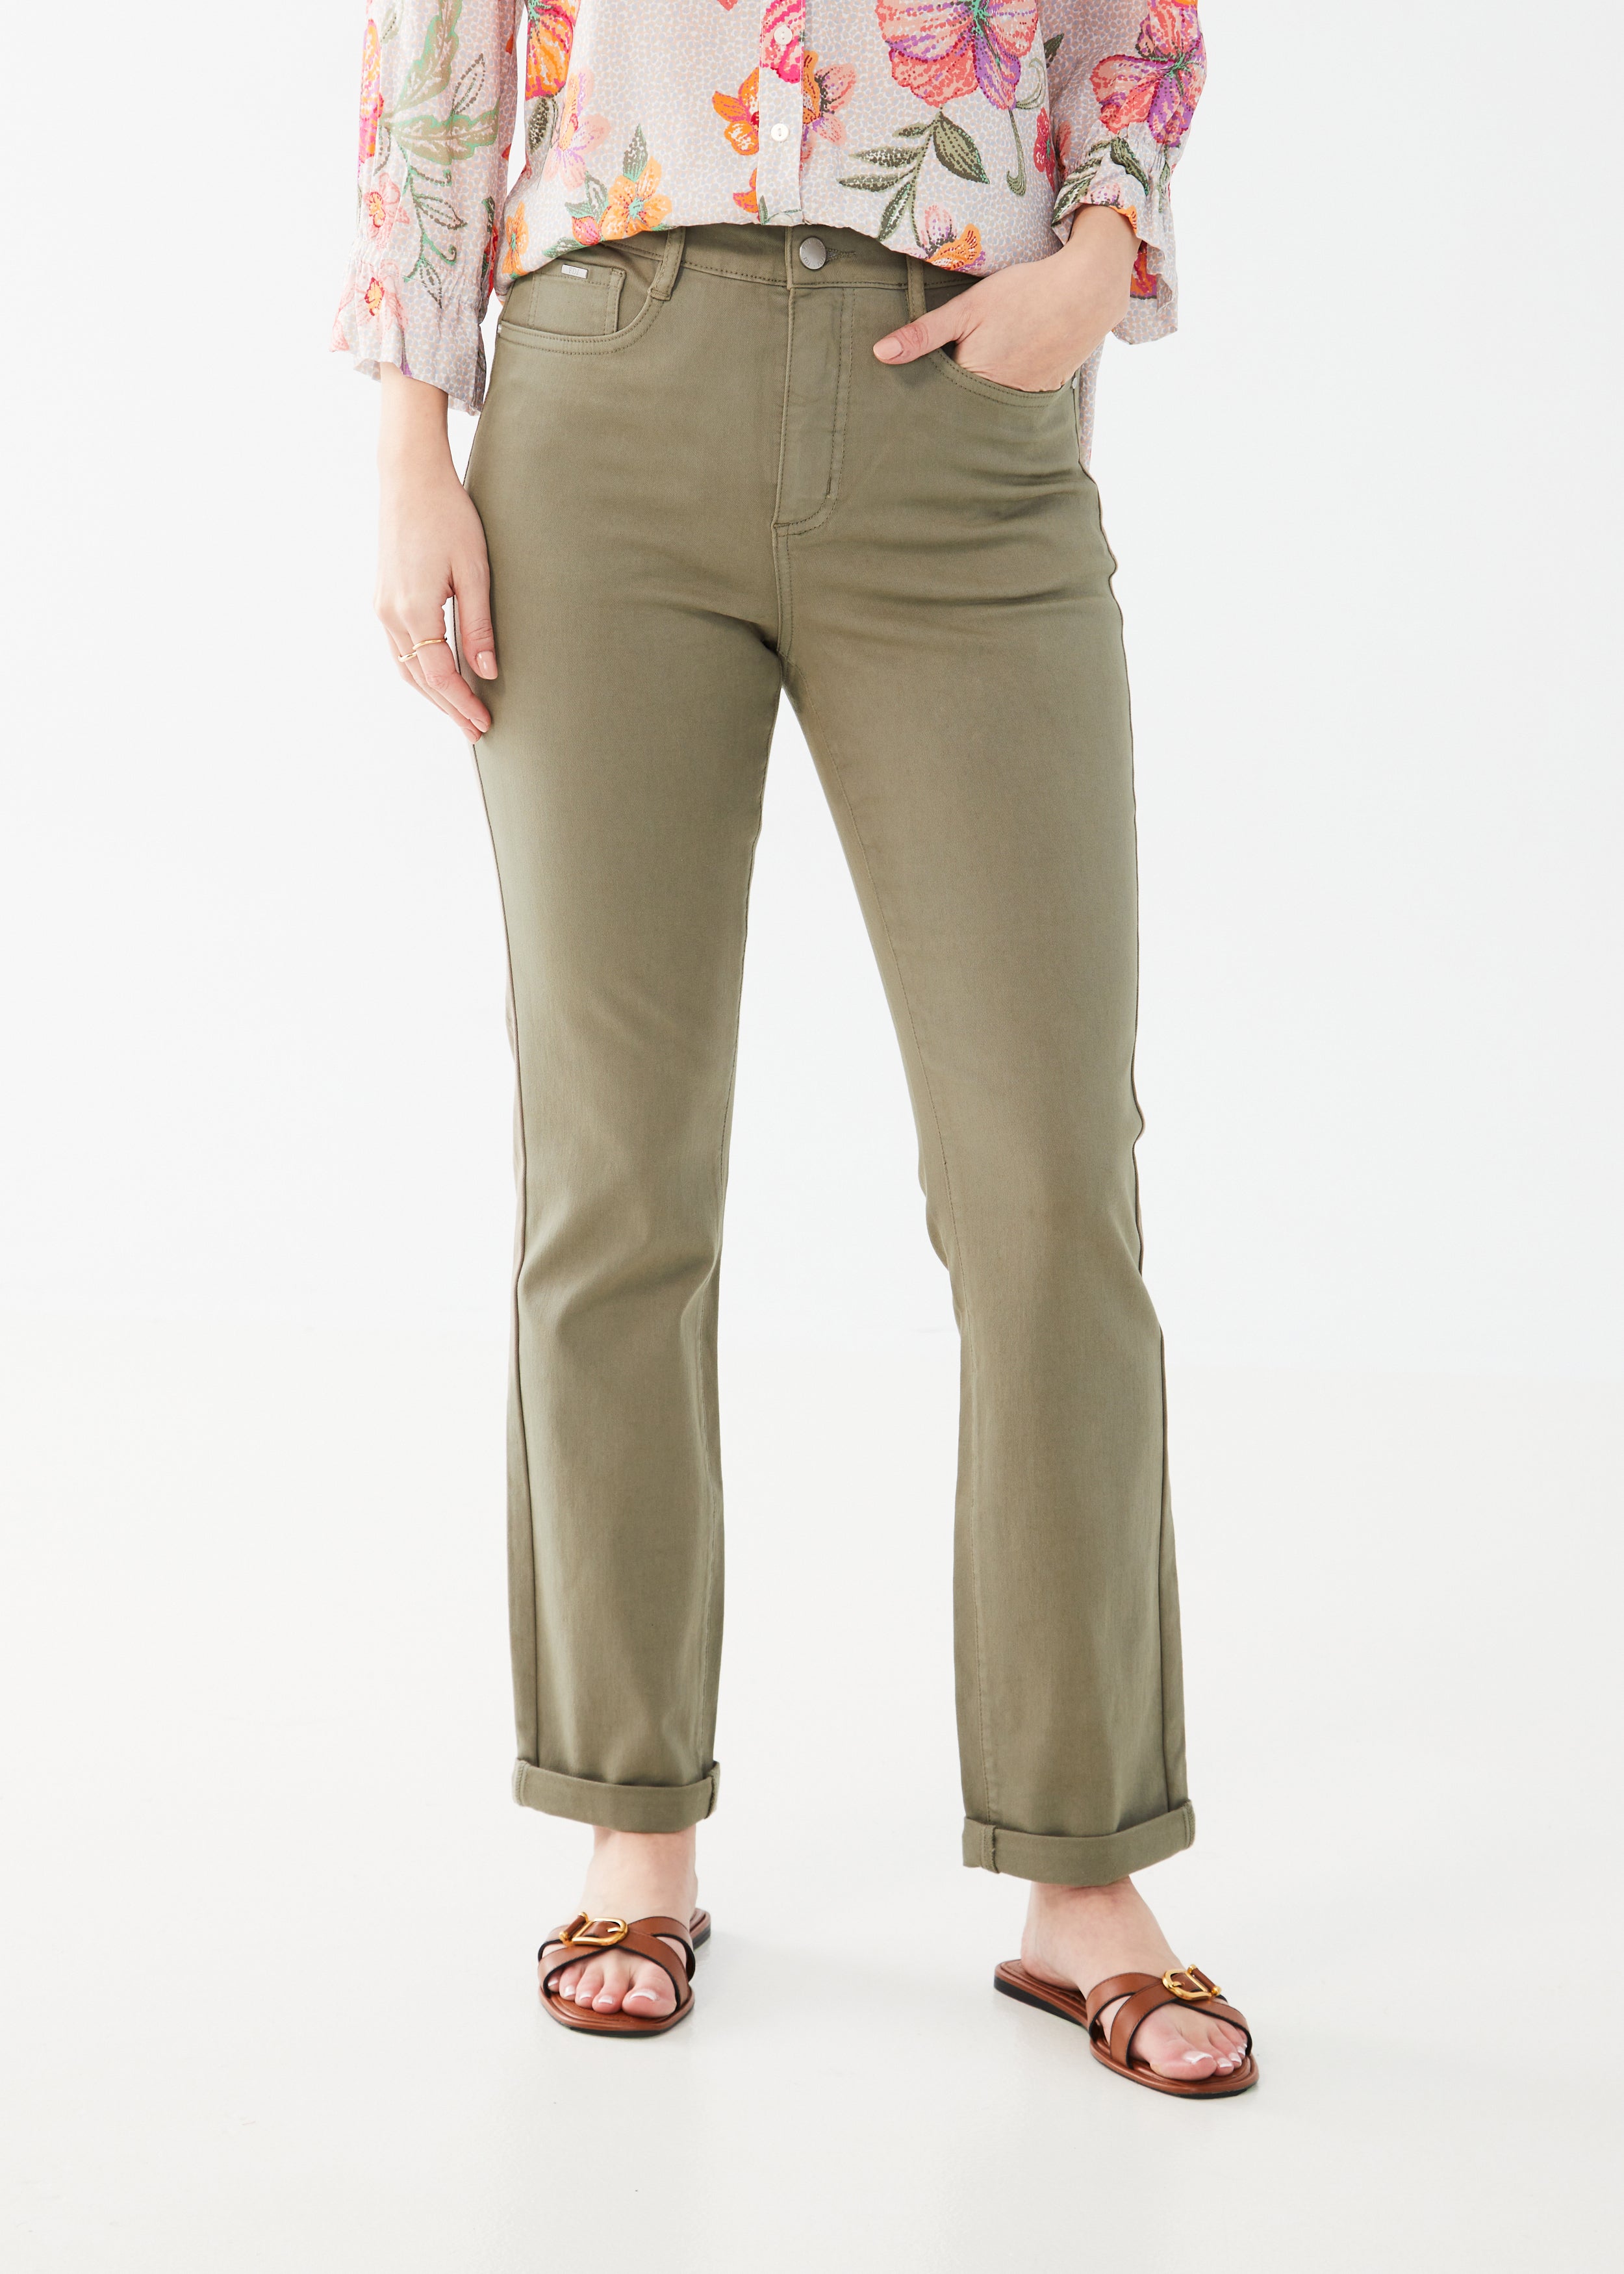 Introducing FDJ Suzanne Straight Leg jeans, featuring a flattering fit and versatile styling in Fern.